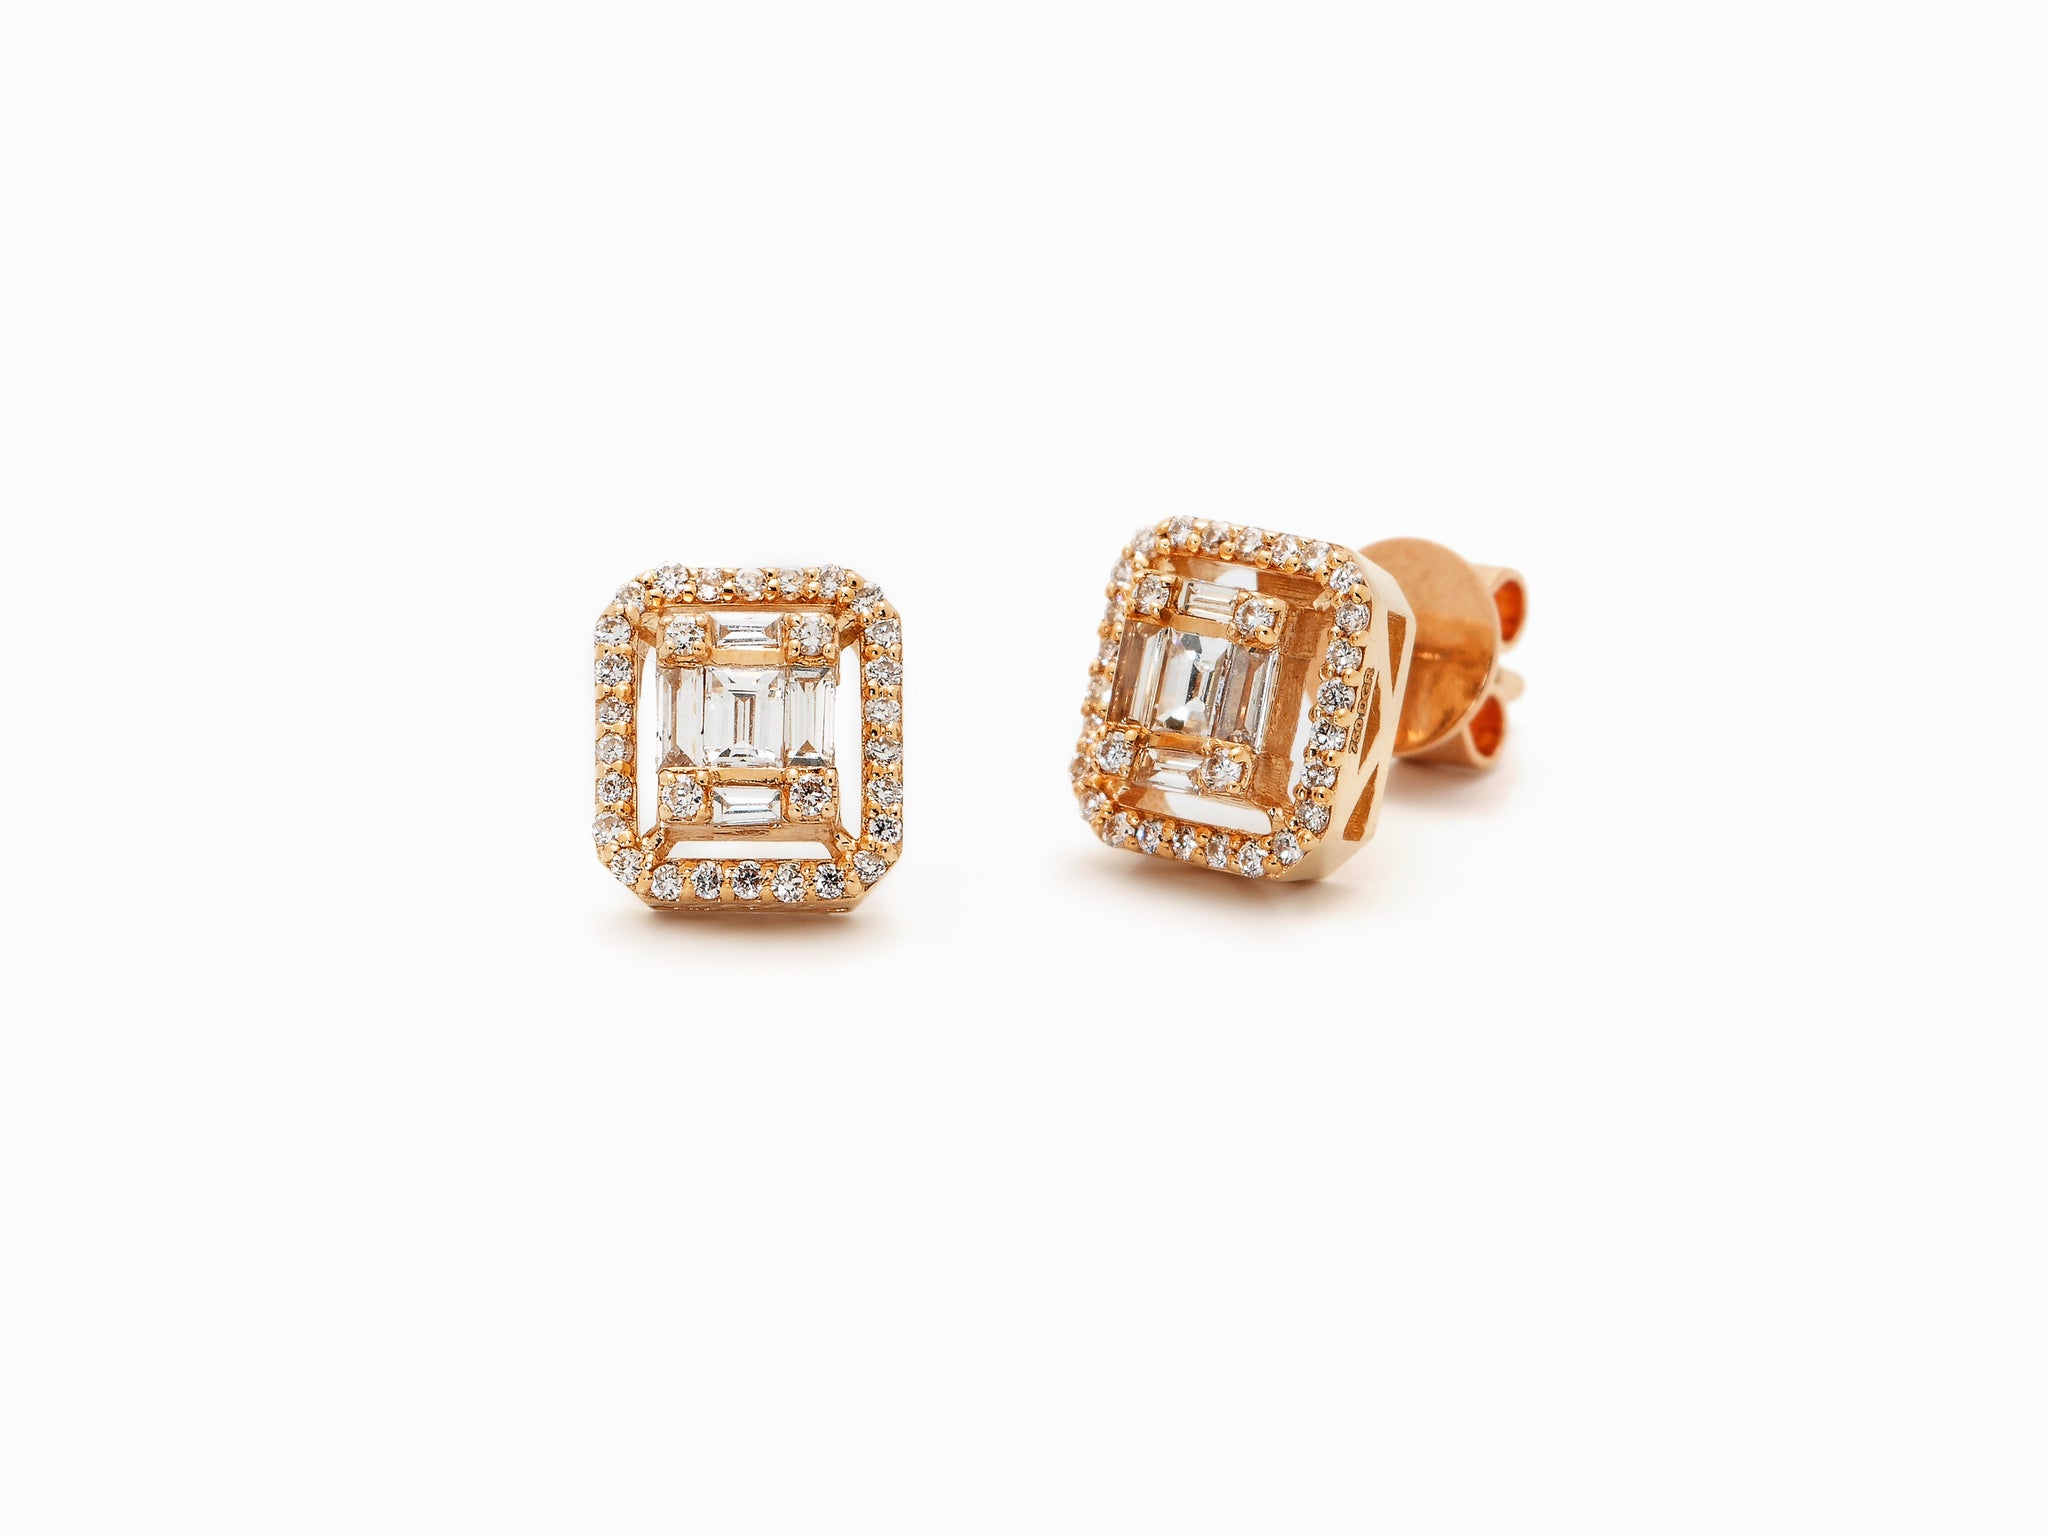 18 krt red gold ear studs set with 10 baquette and 28 brilliant diamonds